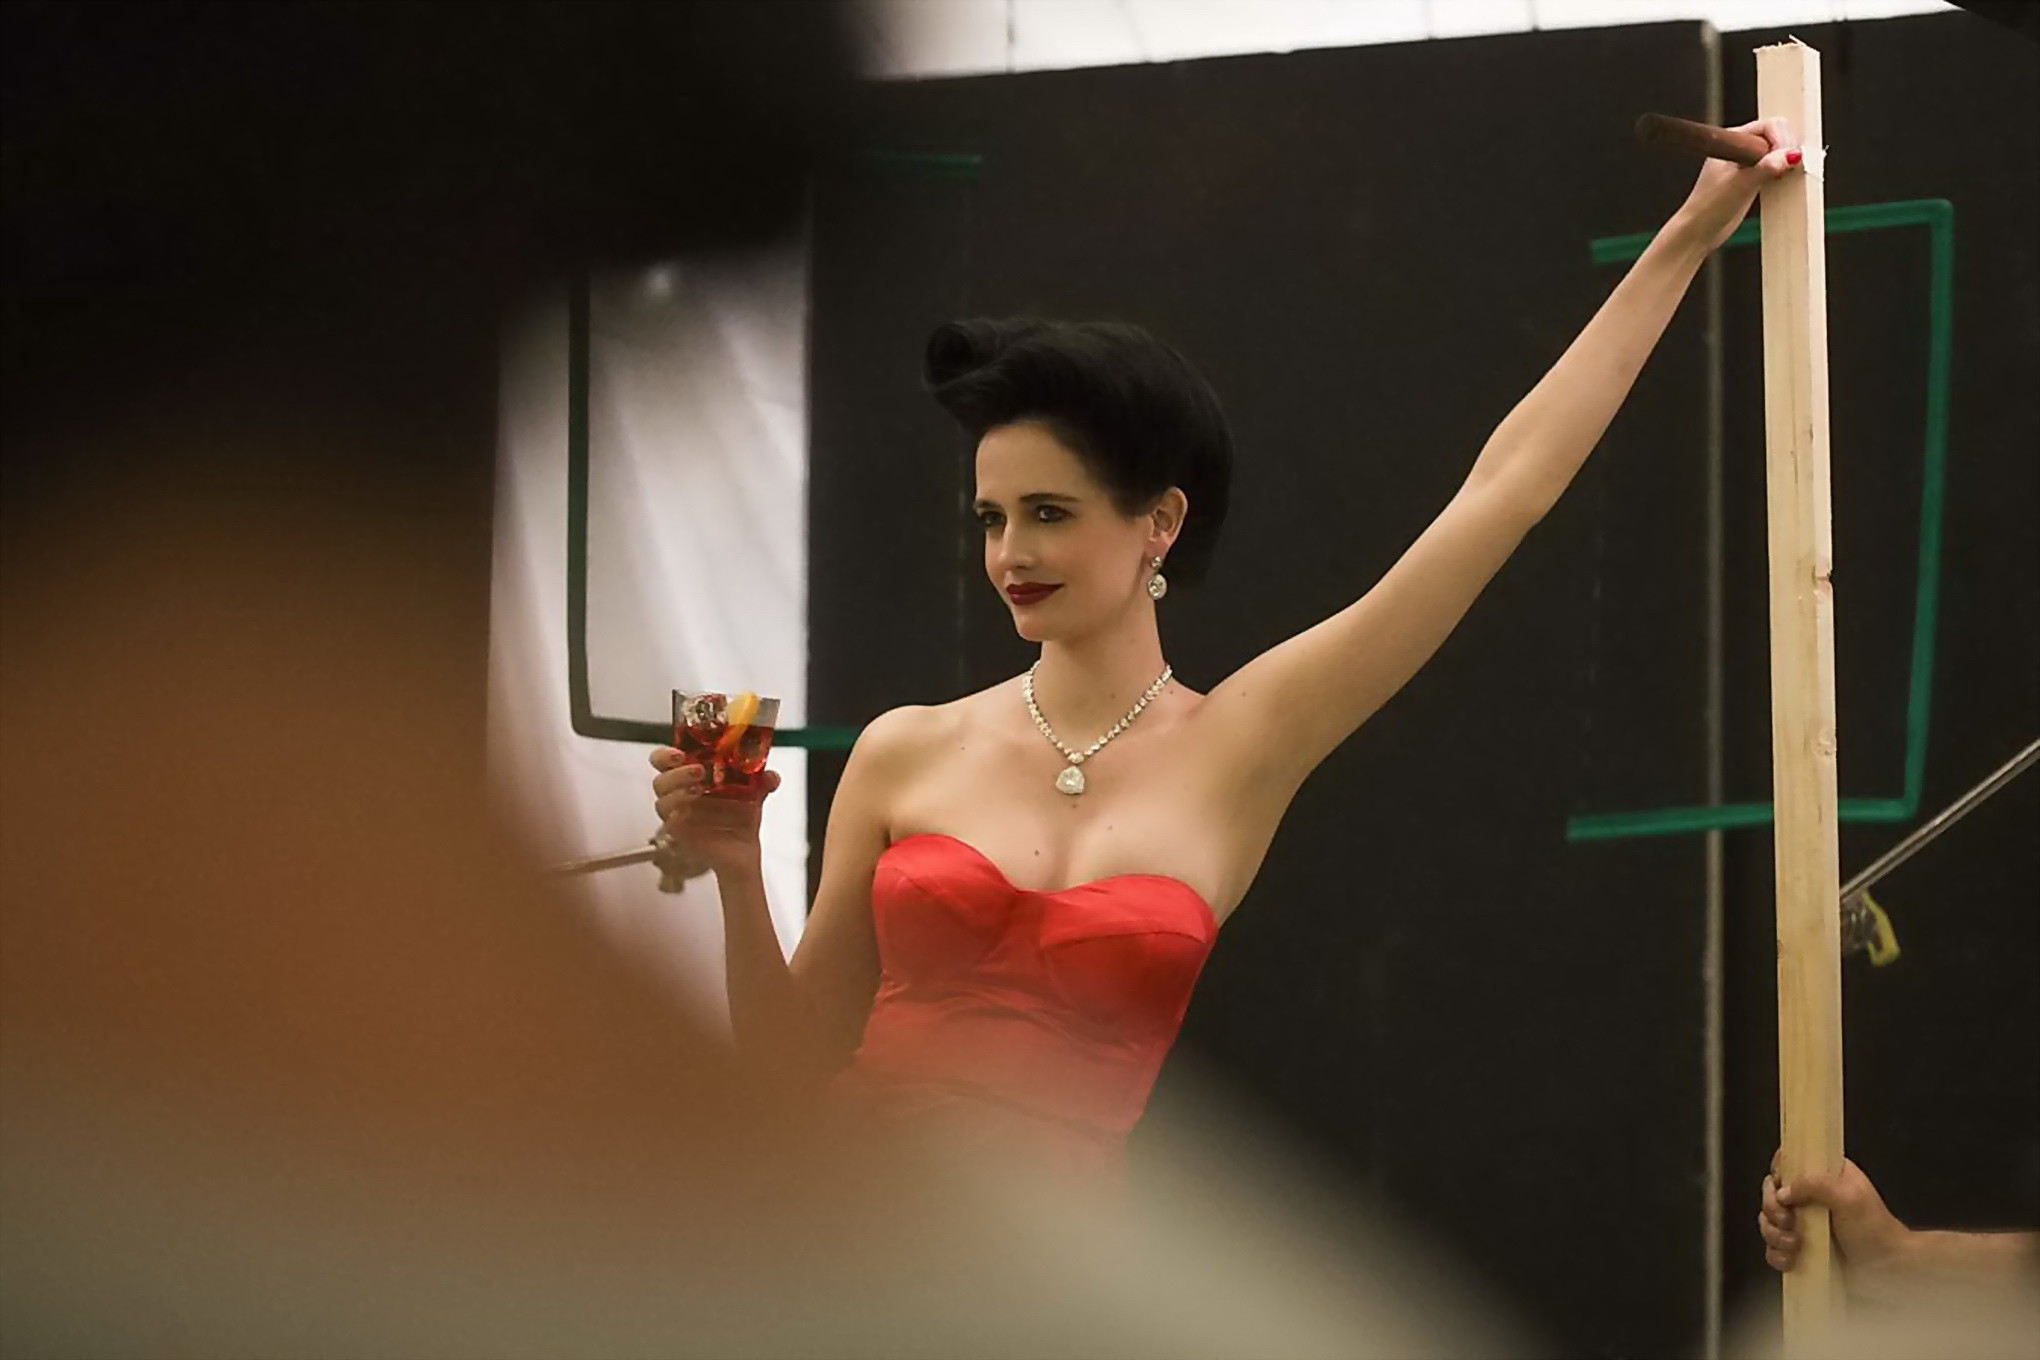 Eva Green busty and leggy wearing various red outfit for Campari Calendar 2015 p #75181739